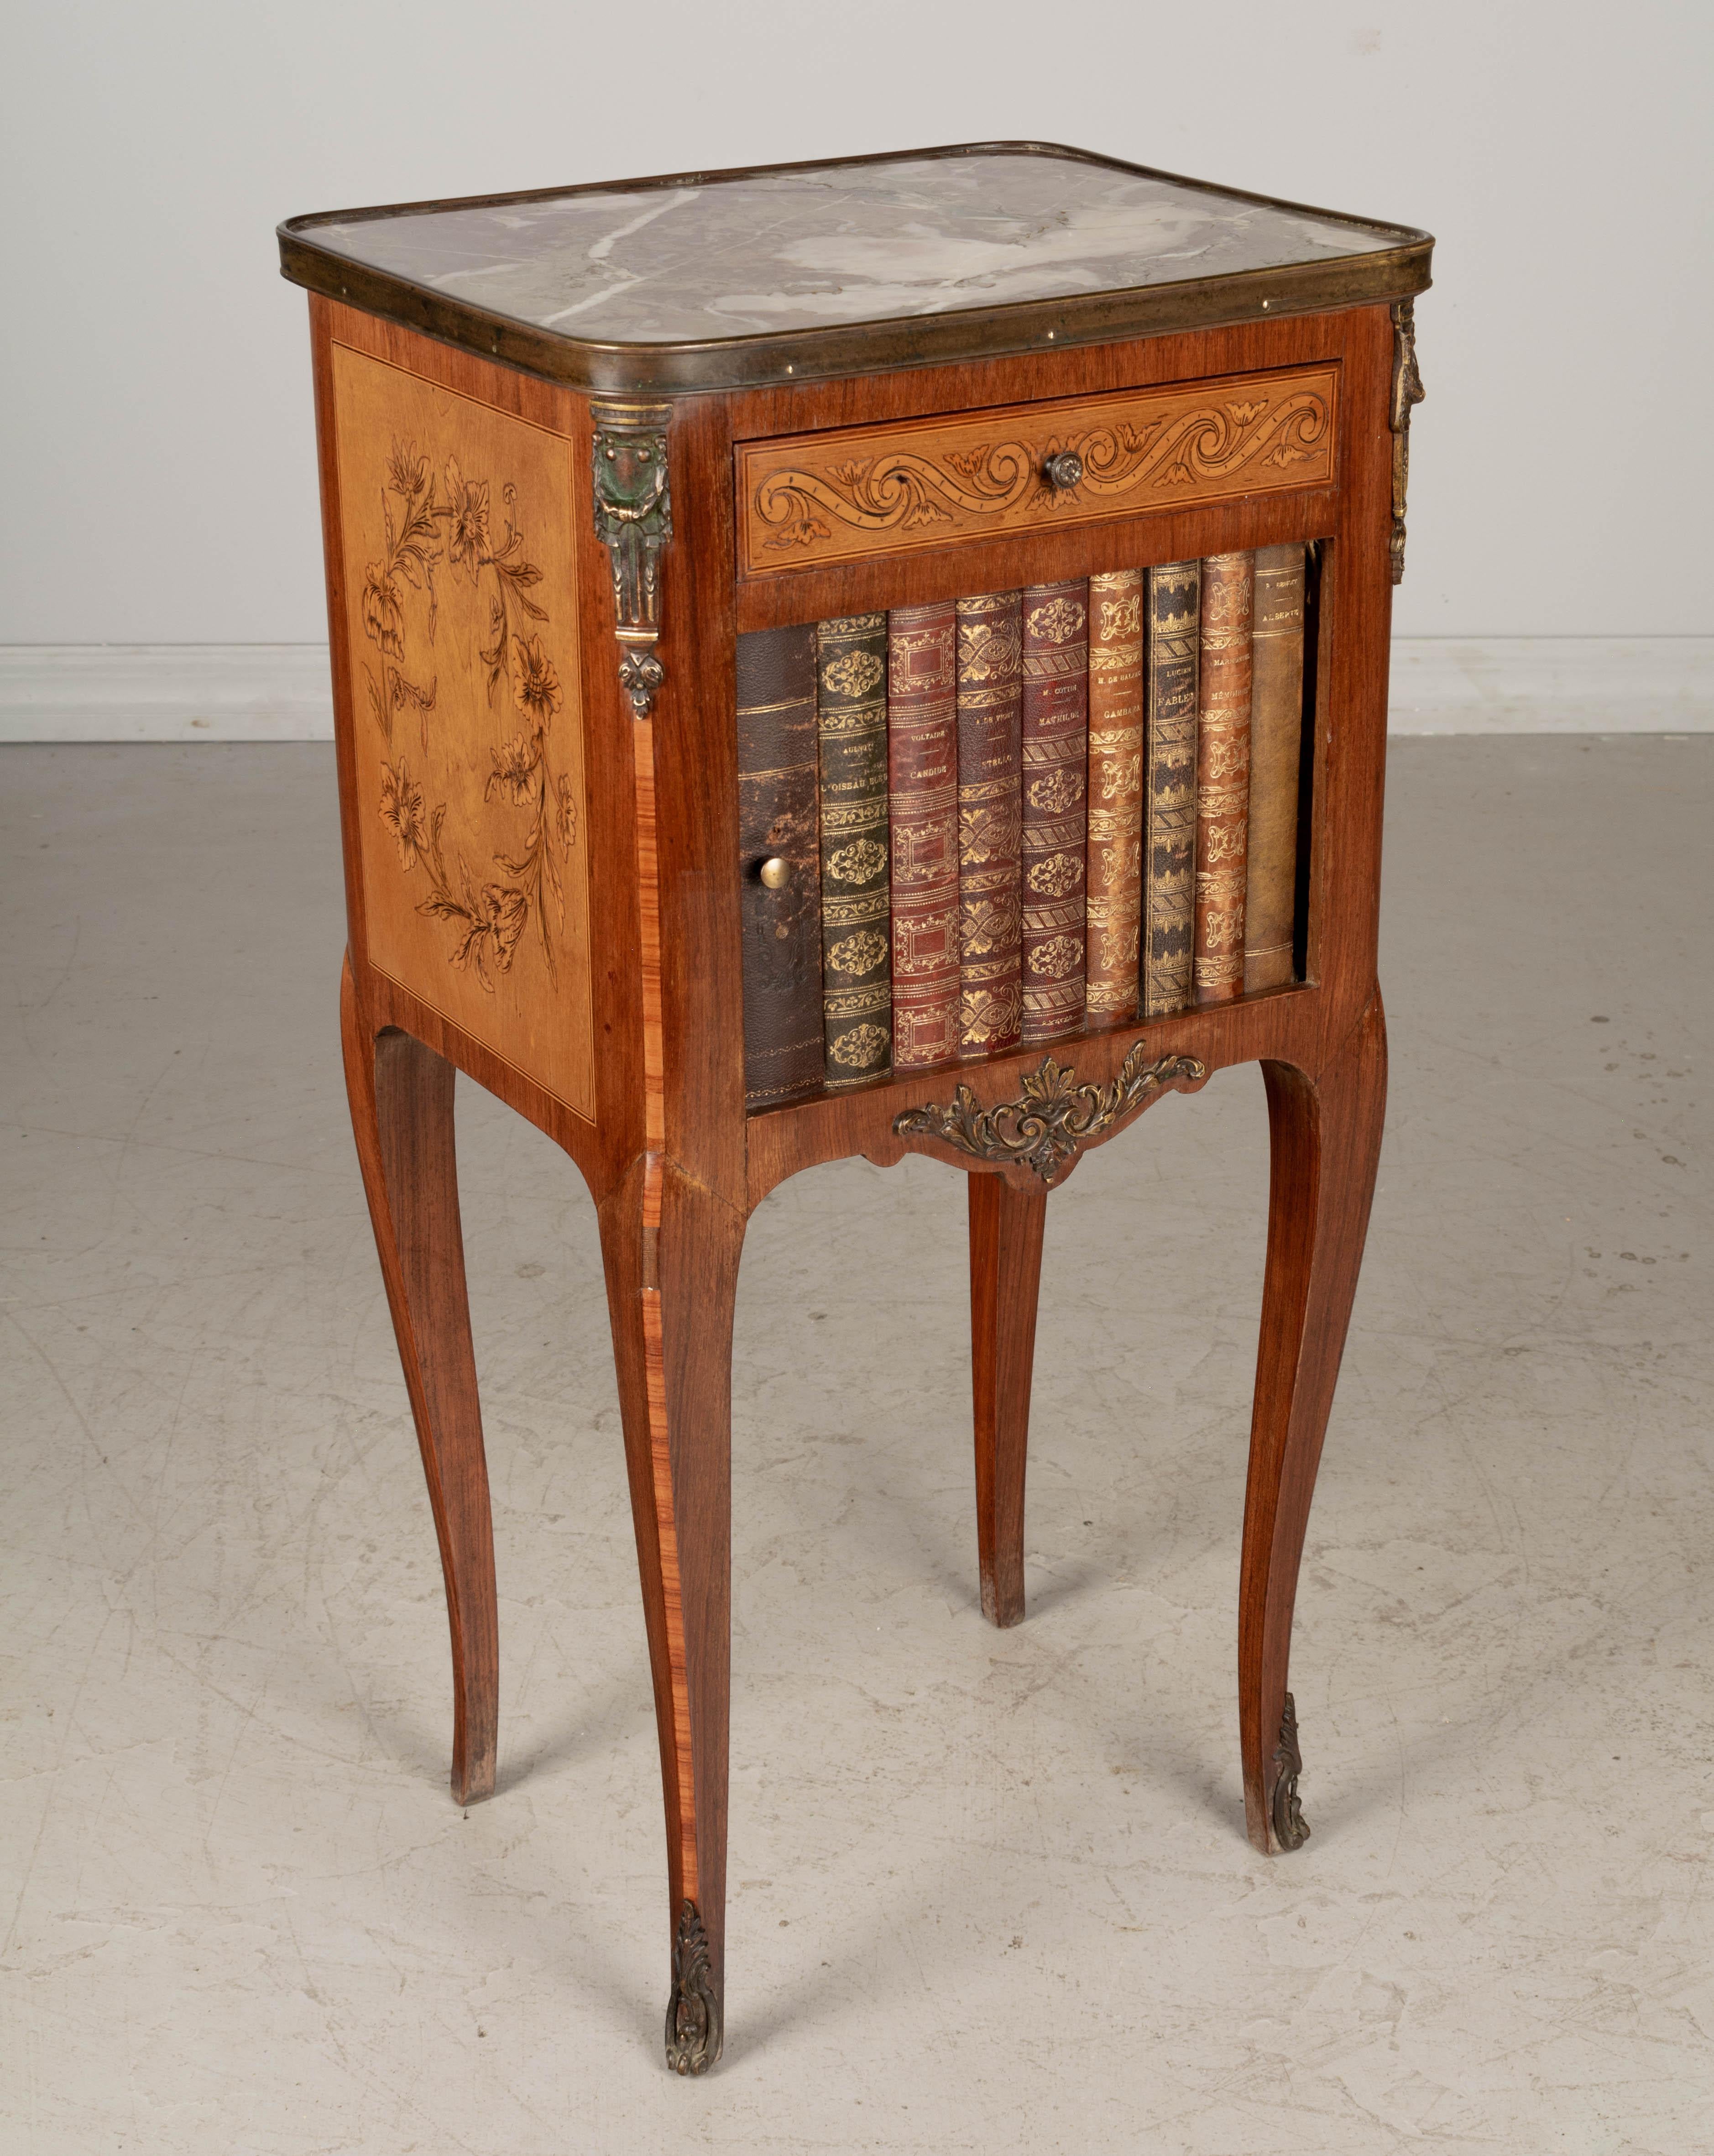 A late 19th century Louis XV style French bronze mounted marquetry bedside table with leather faux livres tambour door, small dovetailed drawer and marble top. The tambour door is faced with gold embossed leather bound book spines with titles by